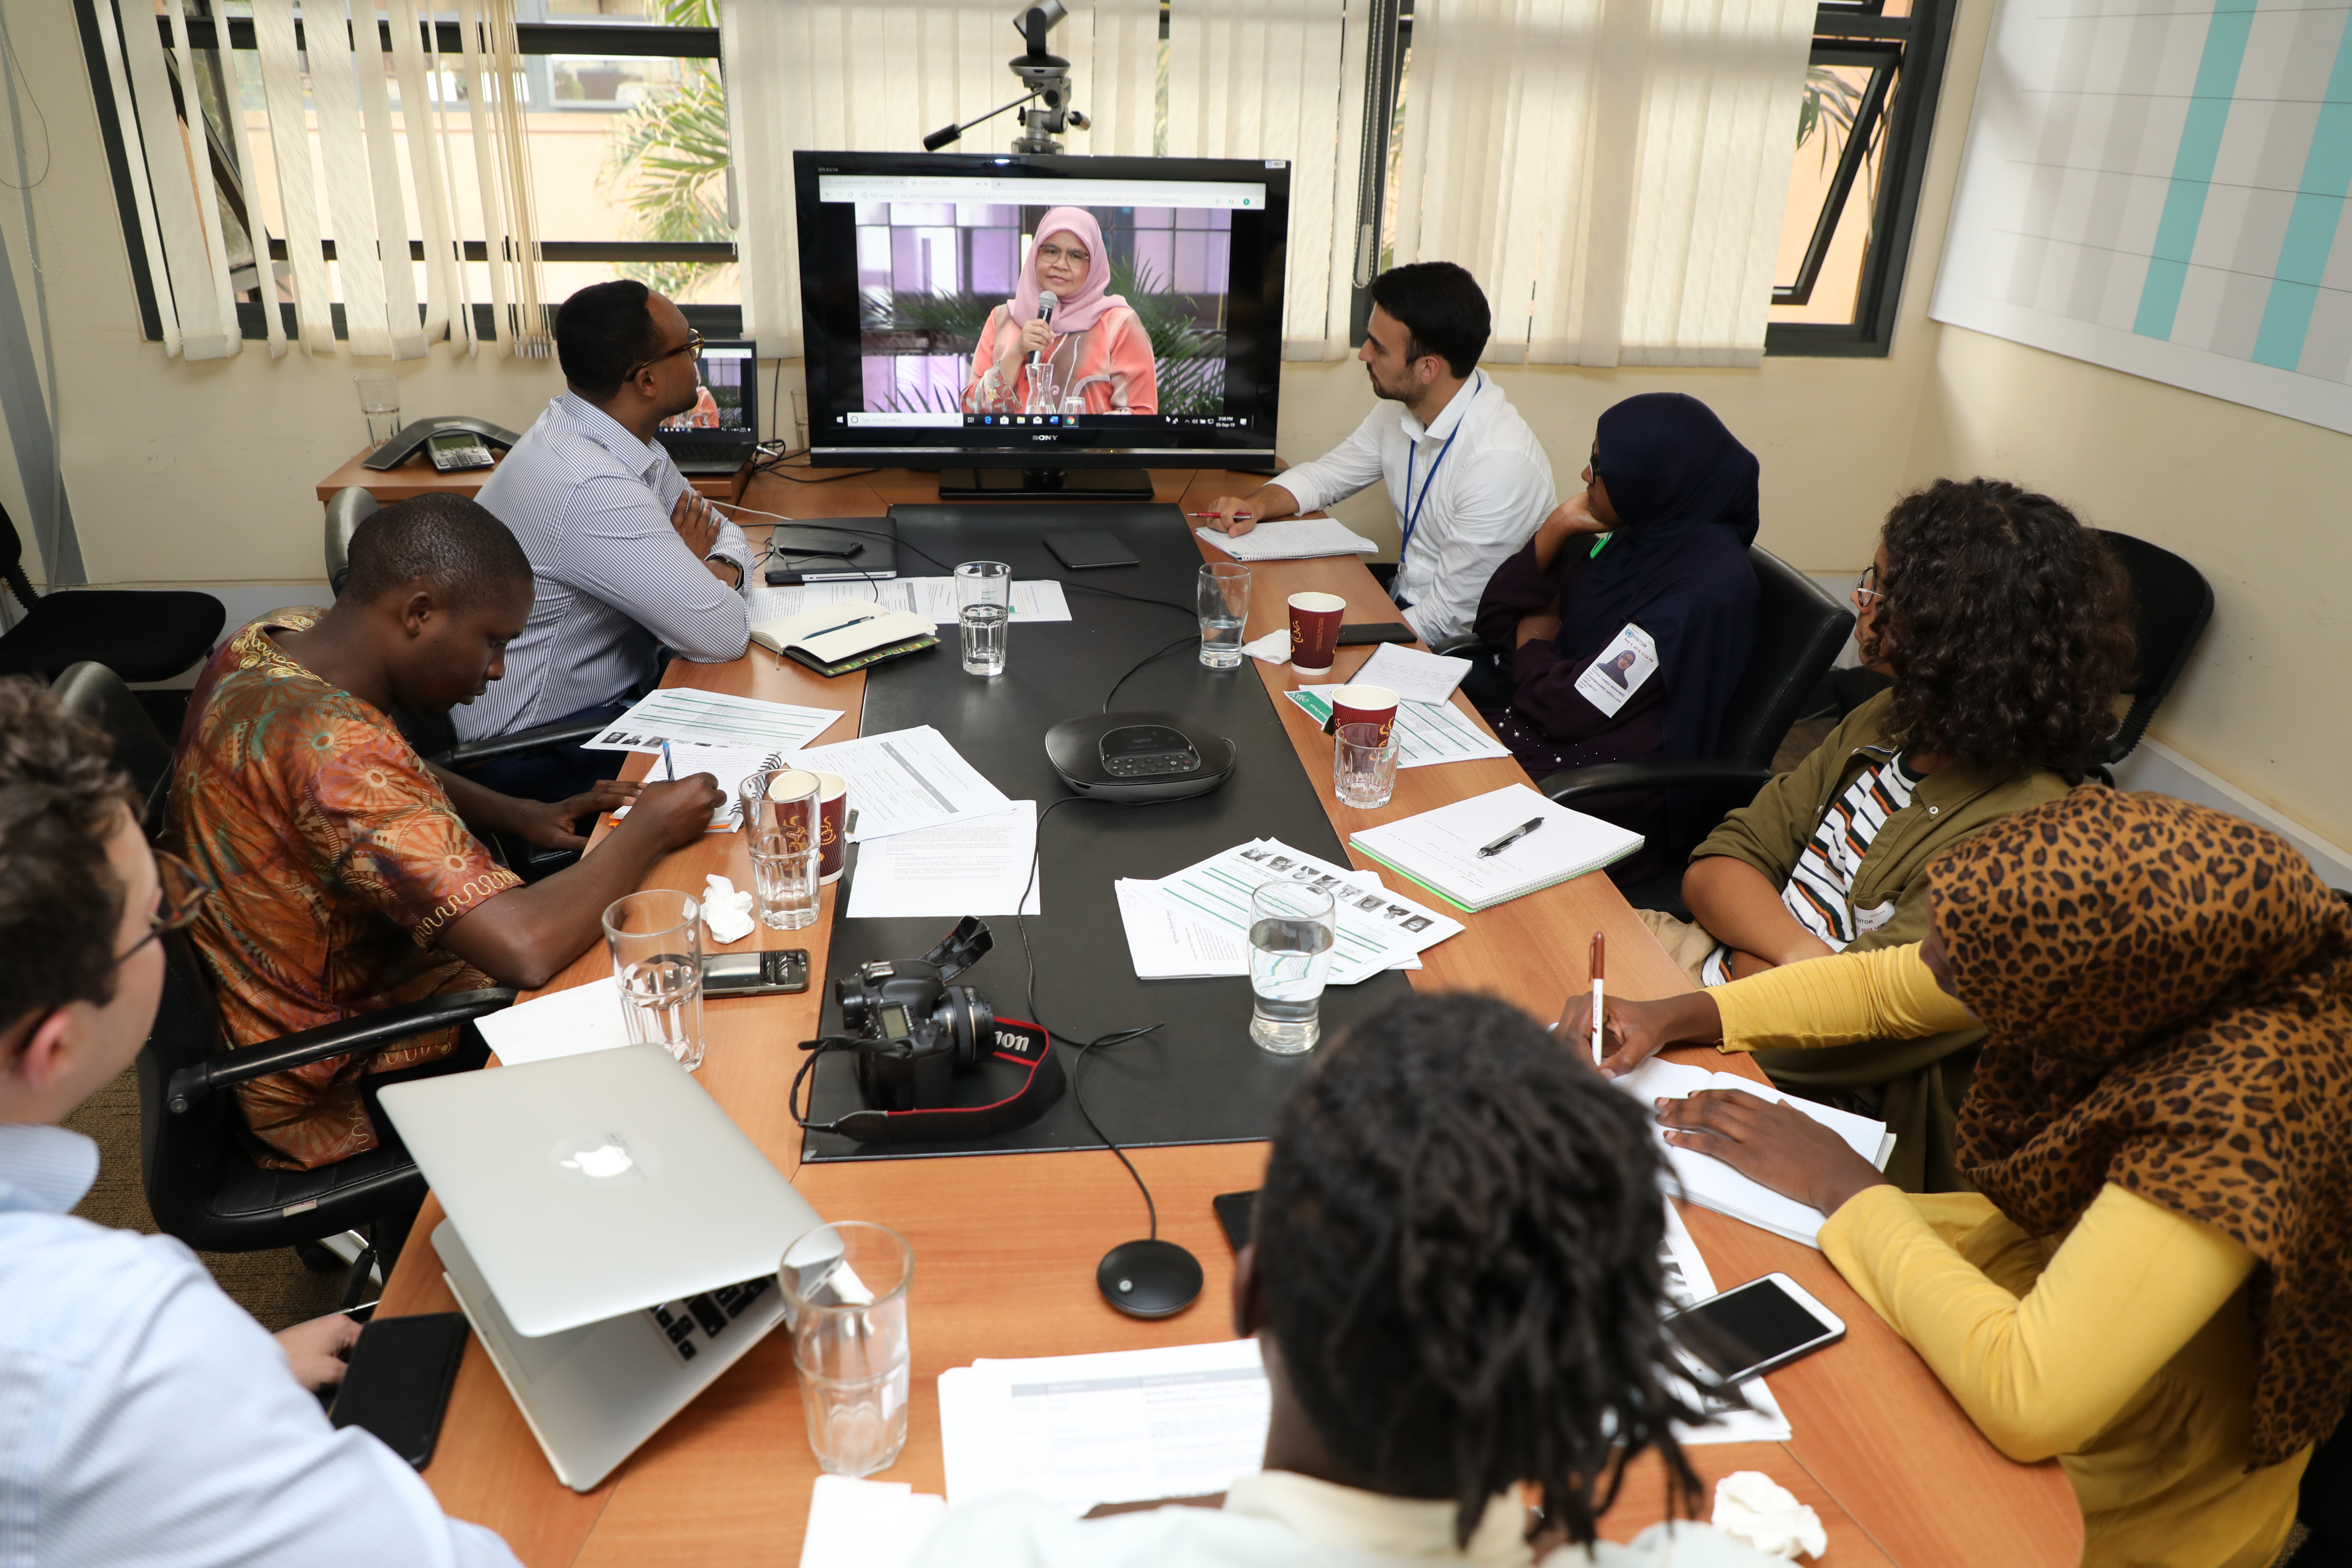 Ms. Maimunah Mohd Sharif, Executive Director of UN-Habitat discussed the challenges of climate change to cities. To reduce their carbon foot print, a group of youth activists working on climate change and peacebuilding participated in the first Oslo Pax Summit virtually from Nairobi. 